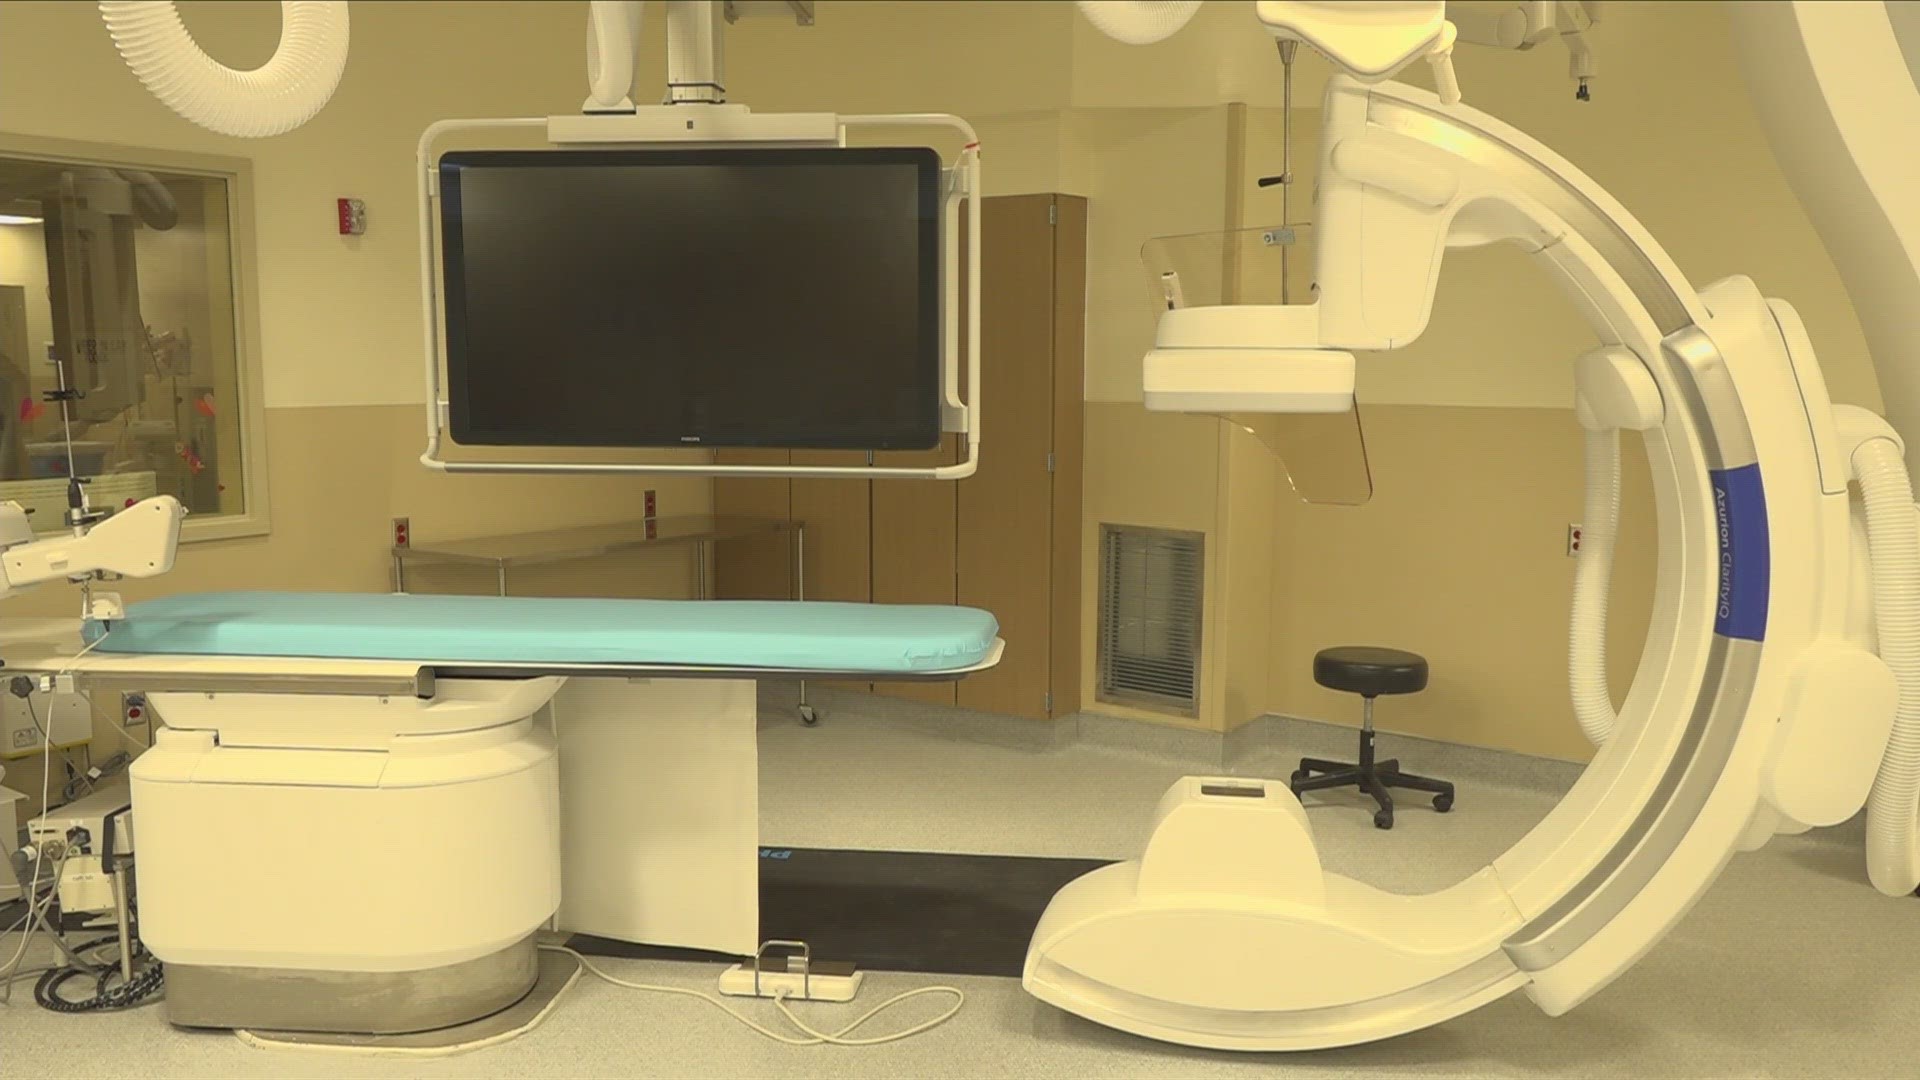 The new equipment allows surgeons to have better visibility and perform less intrusive surgeries, benefiting patients.